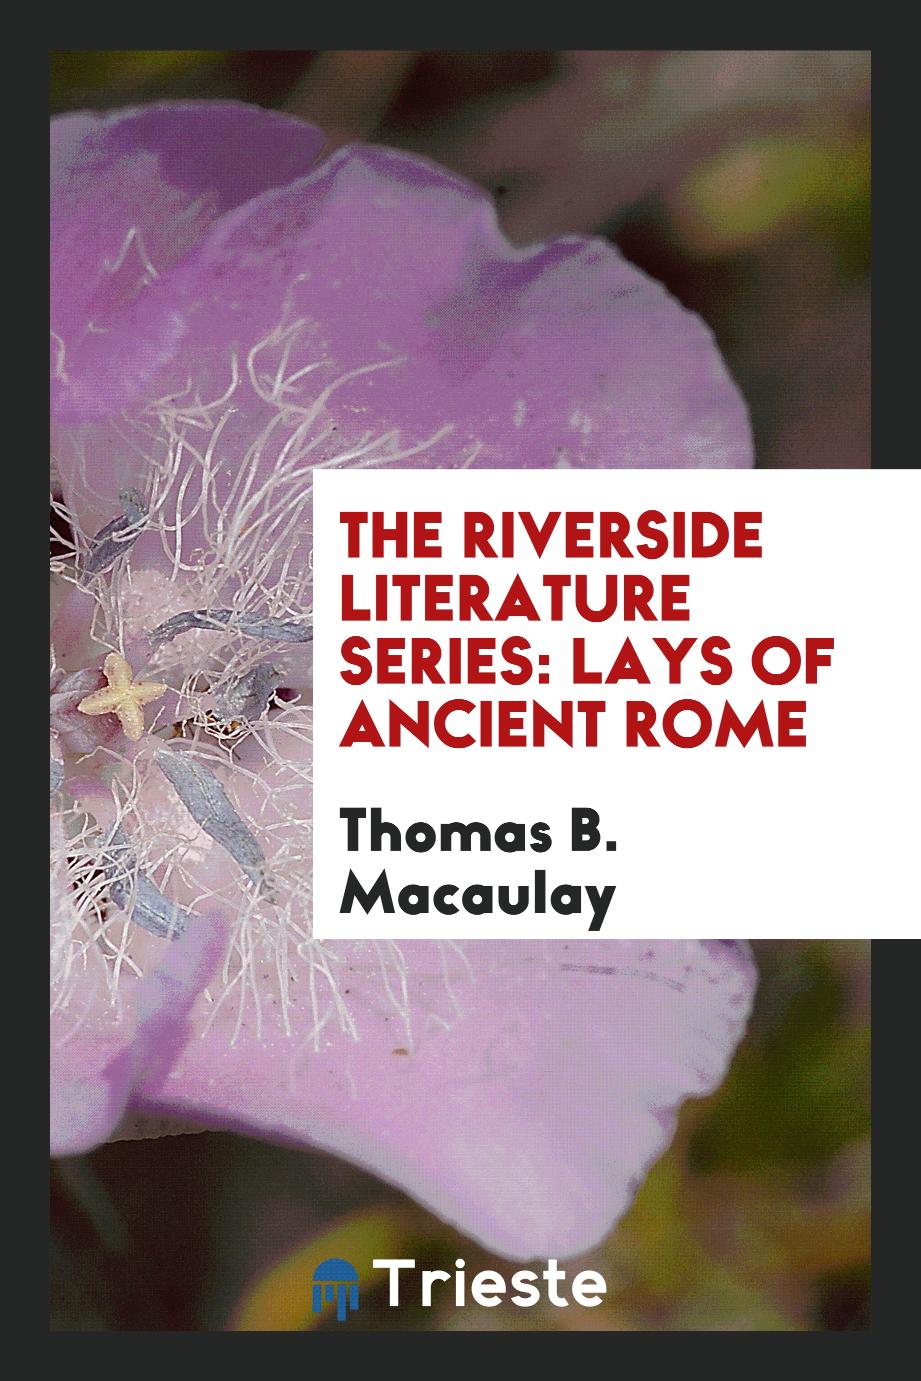 The Riverside literature Series: Lays of Ancient Rome